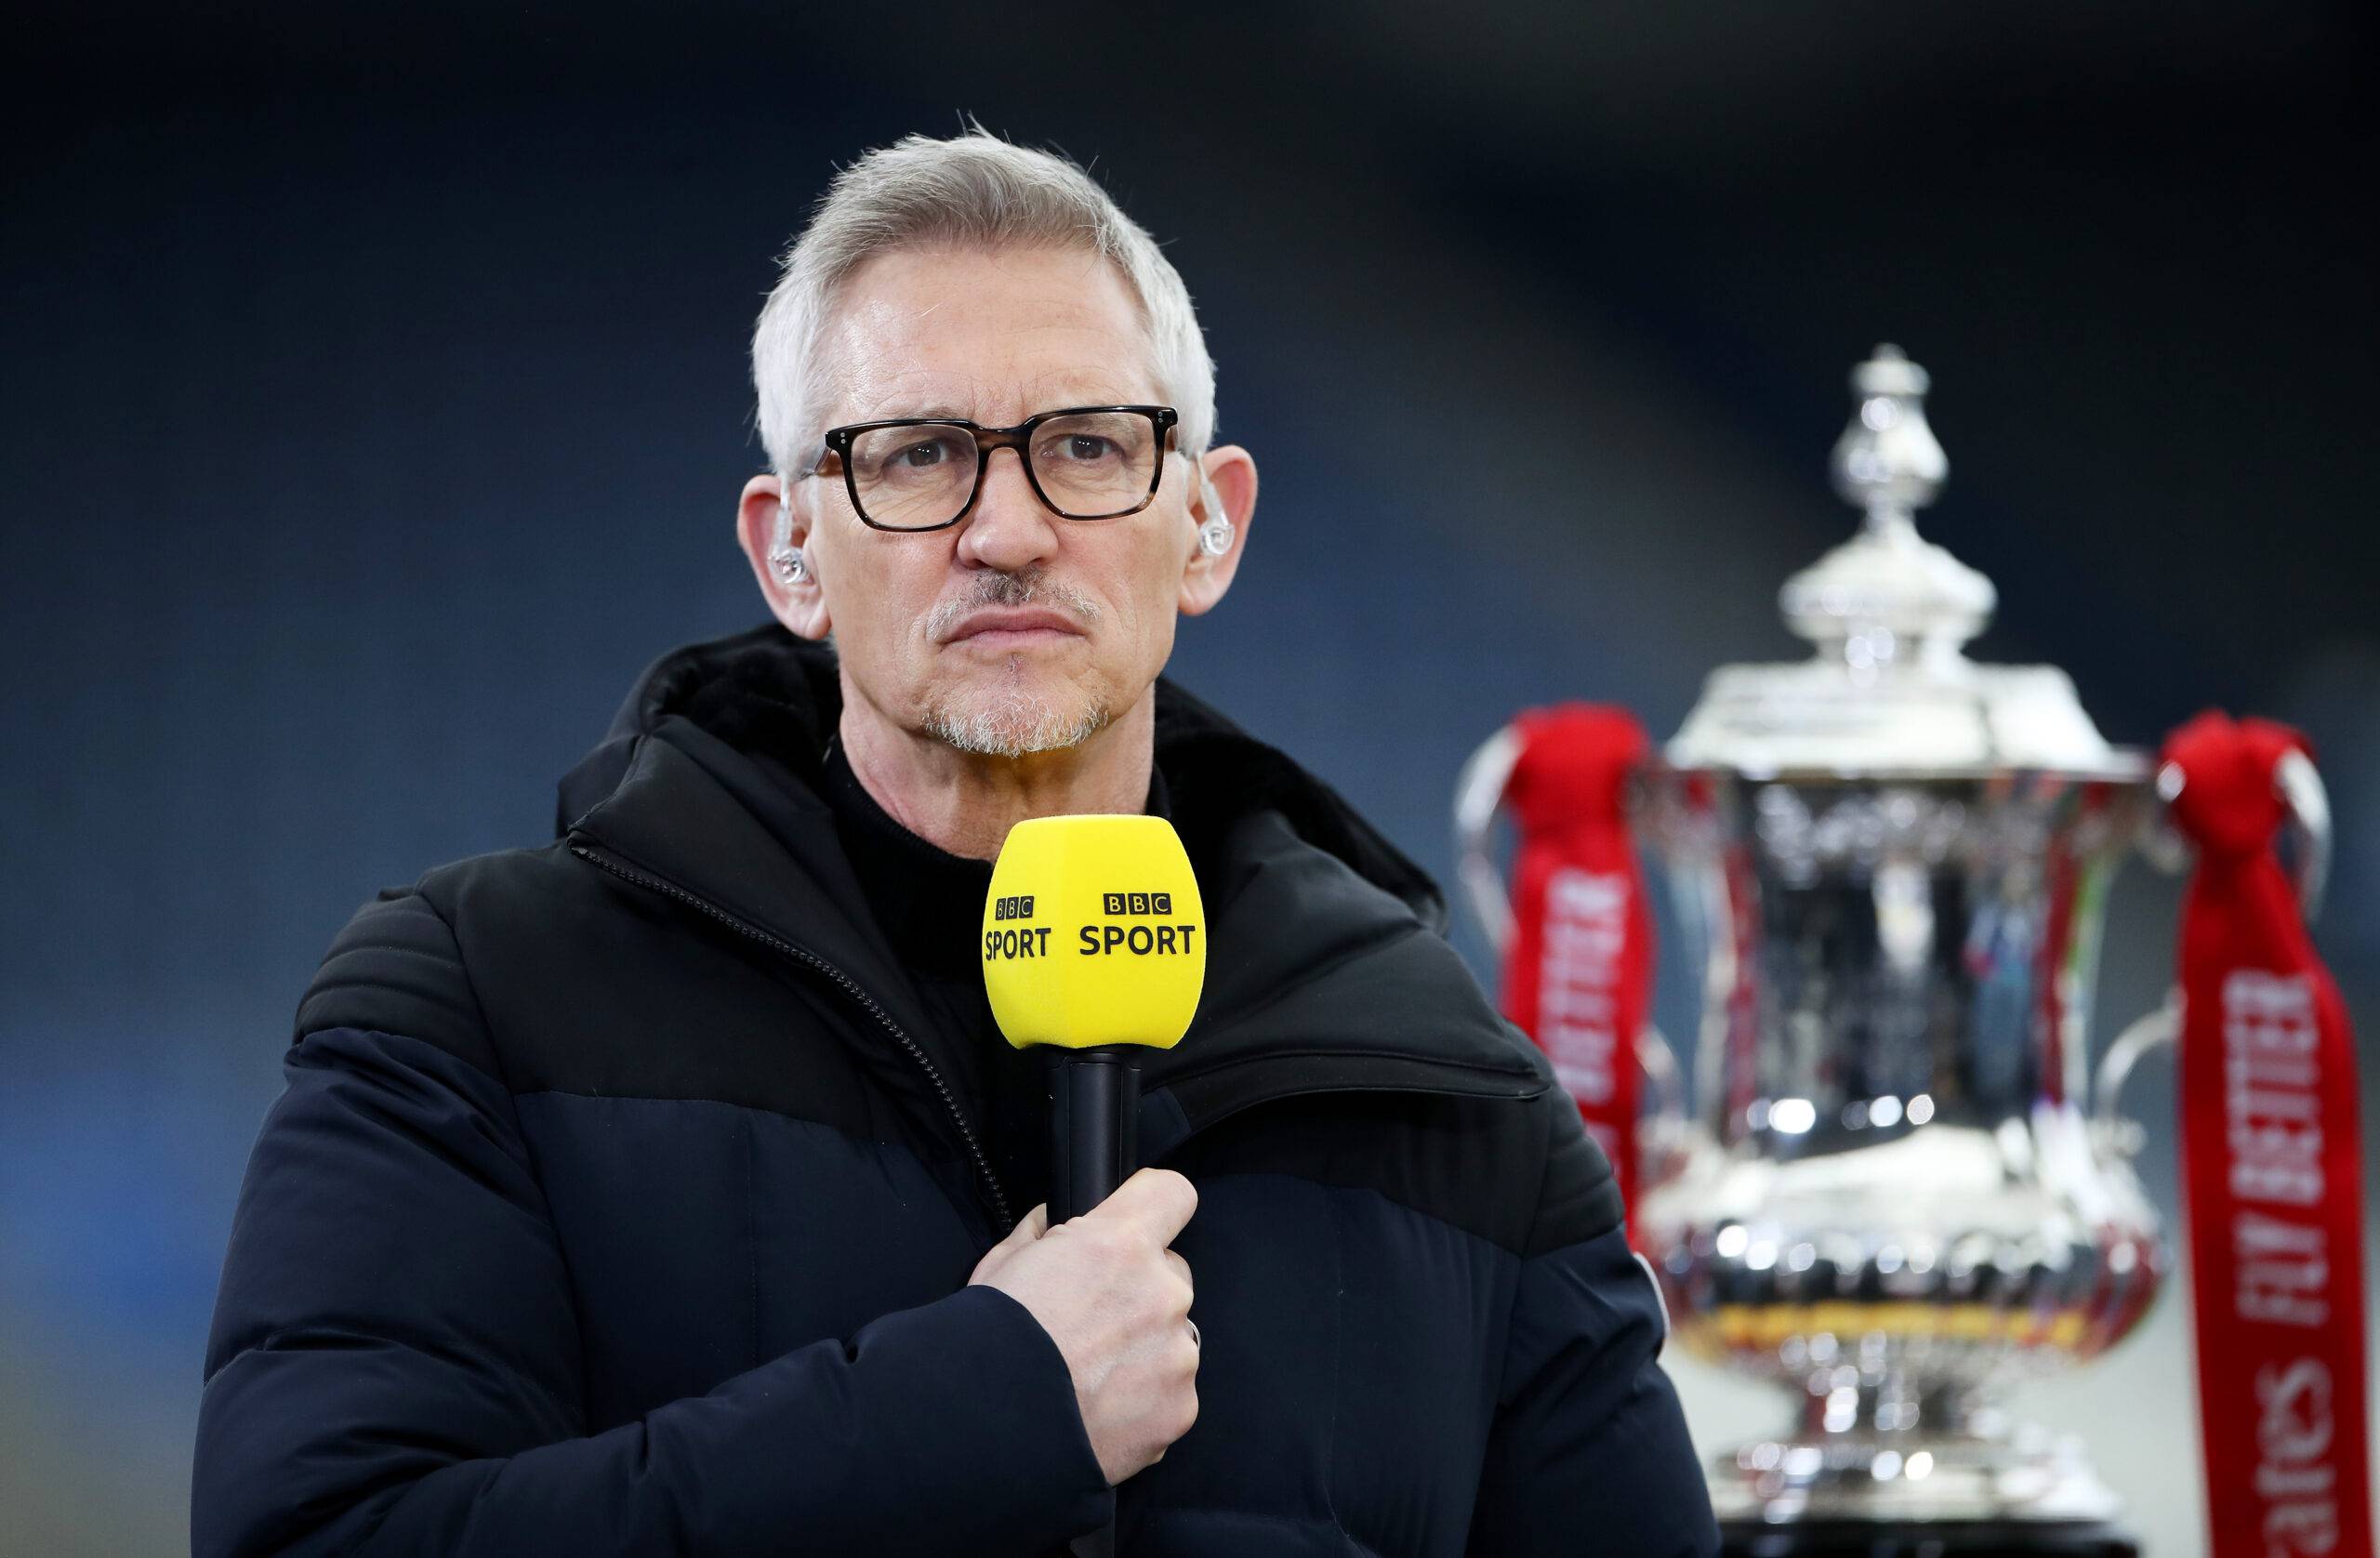 Gary Lineker stands next to the FA Cup